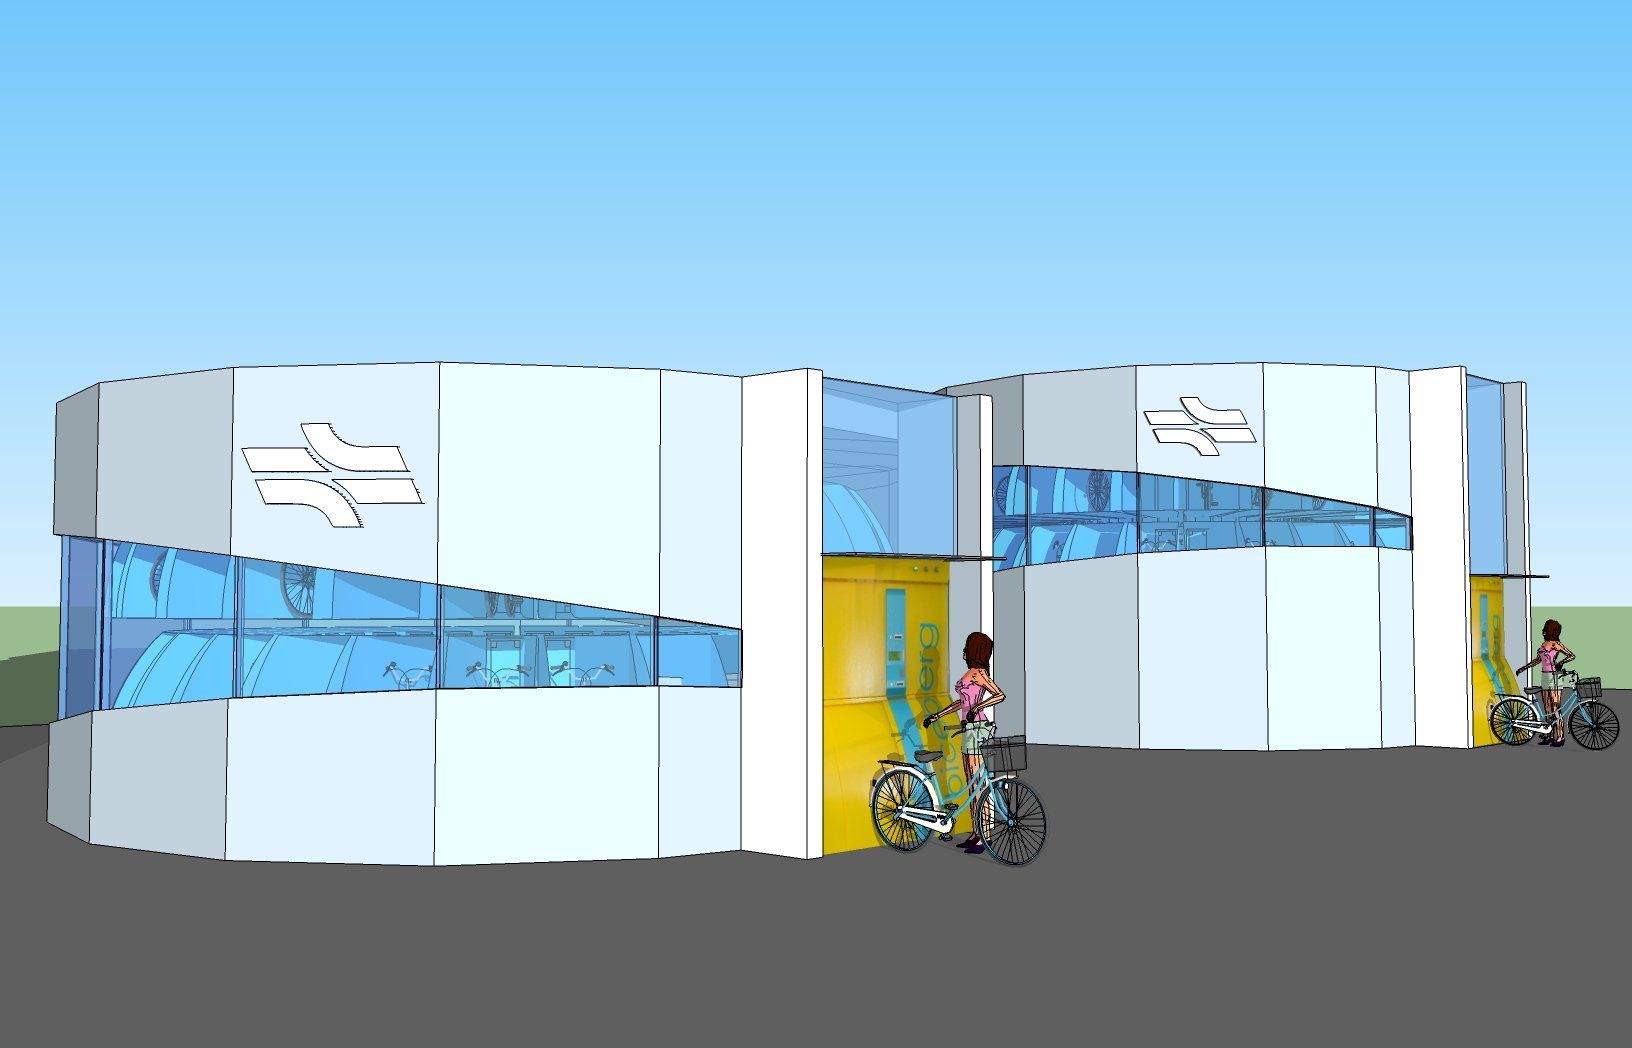 Automated bicycle parking biceberg